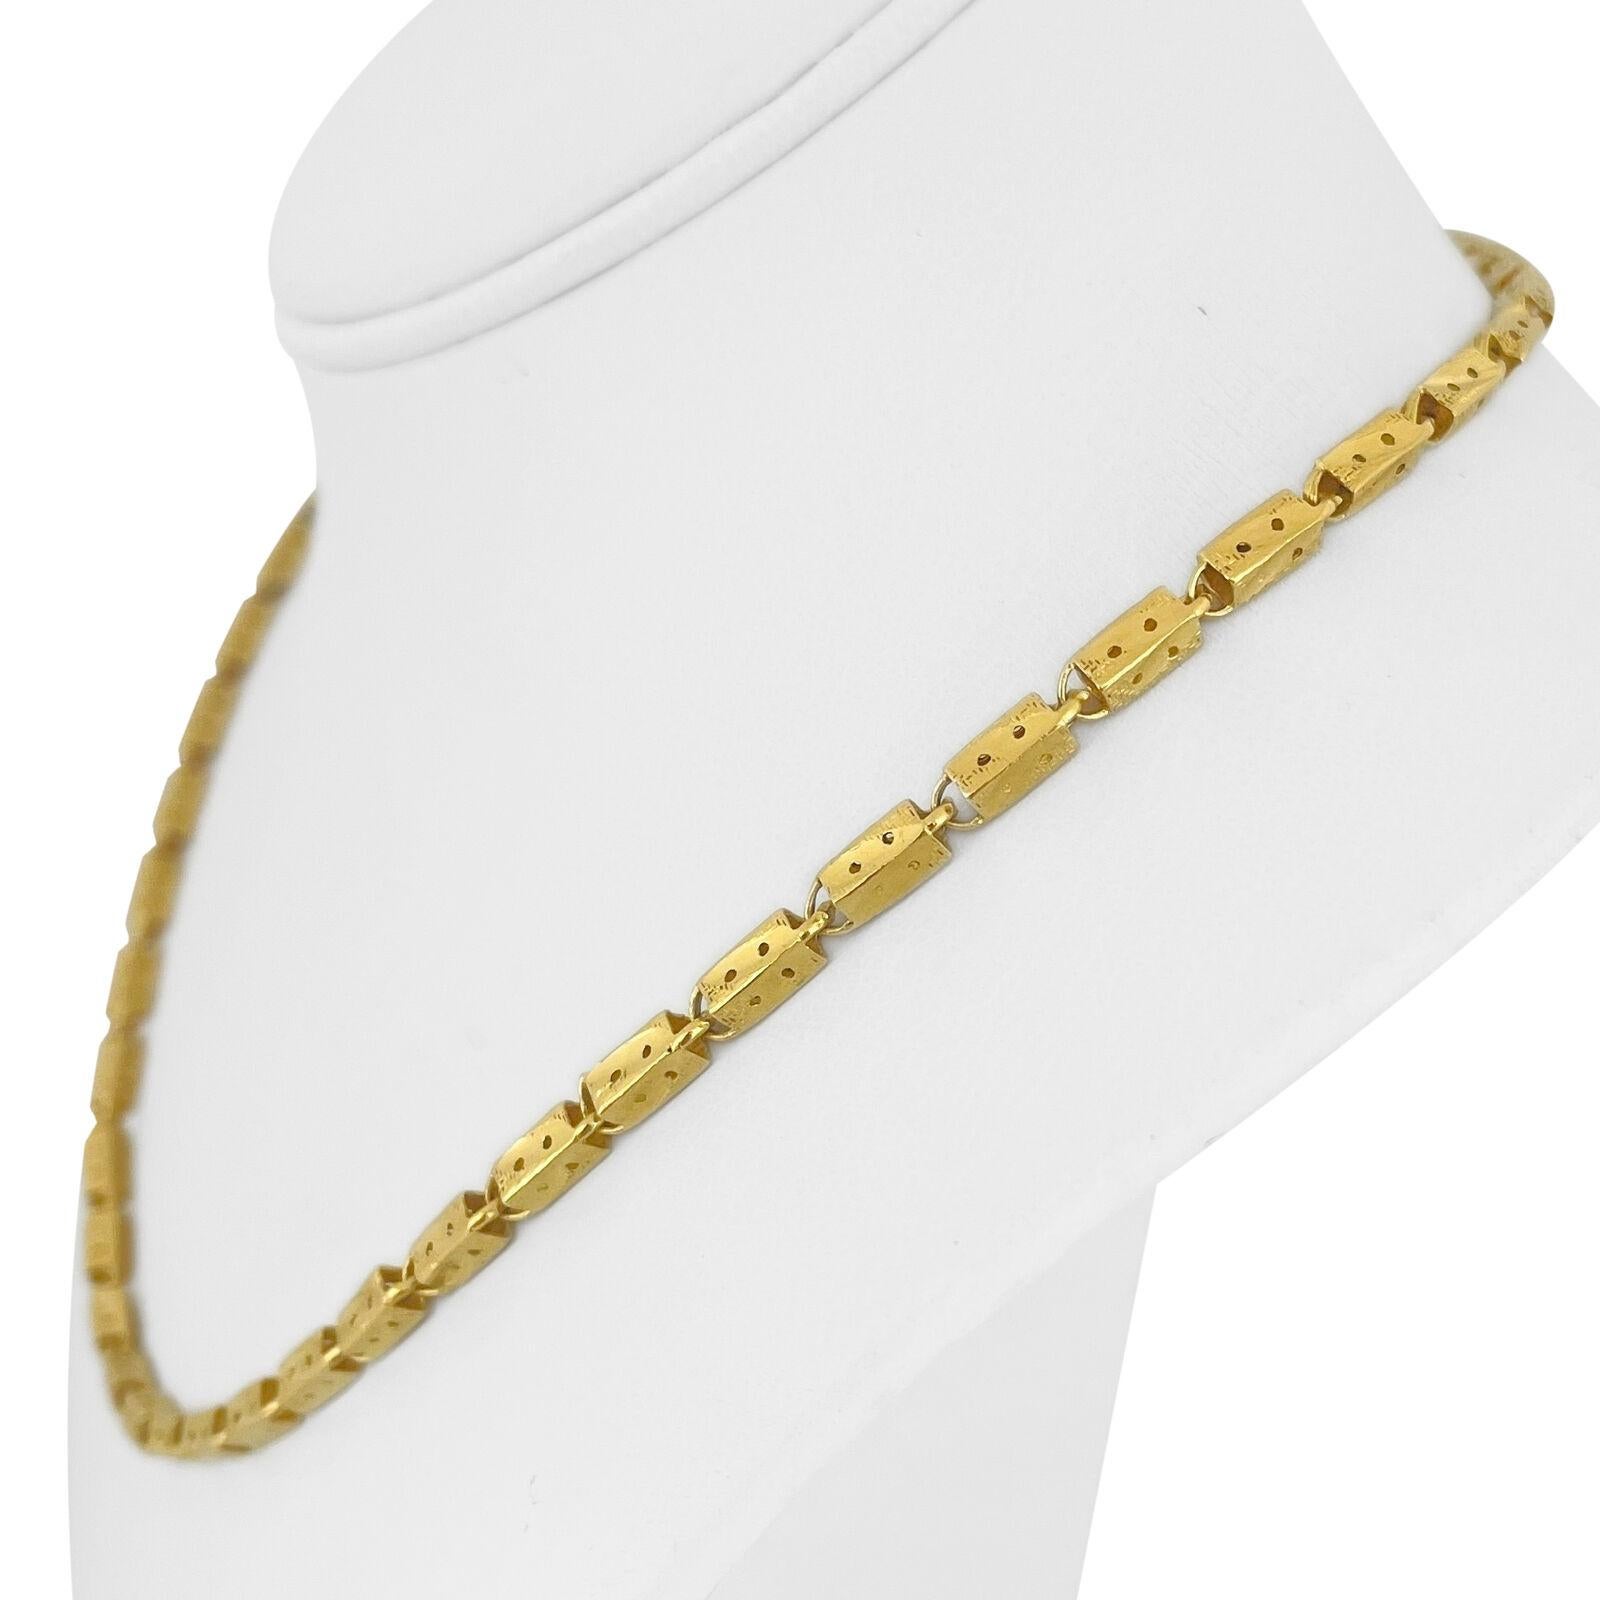 24k Pure Yellow Gold 26.9g Ladies Diamond Cut 3mm Bar Link Chain Necklace 18